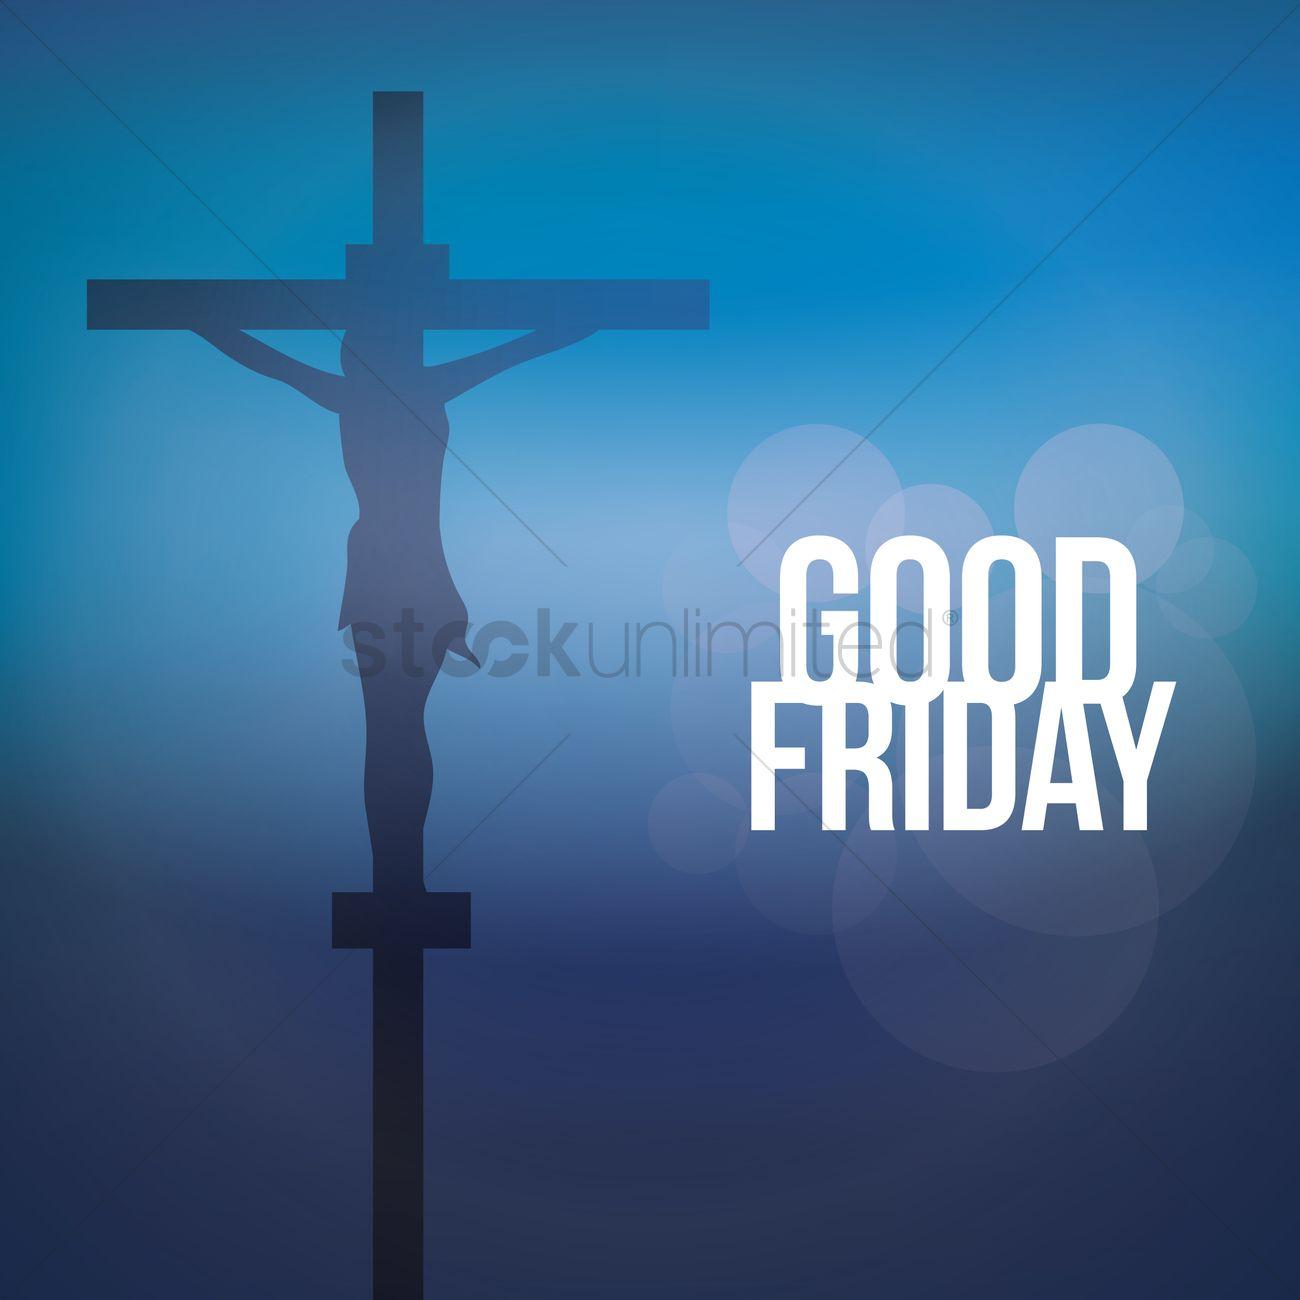 Good friday background Vector Image